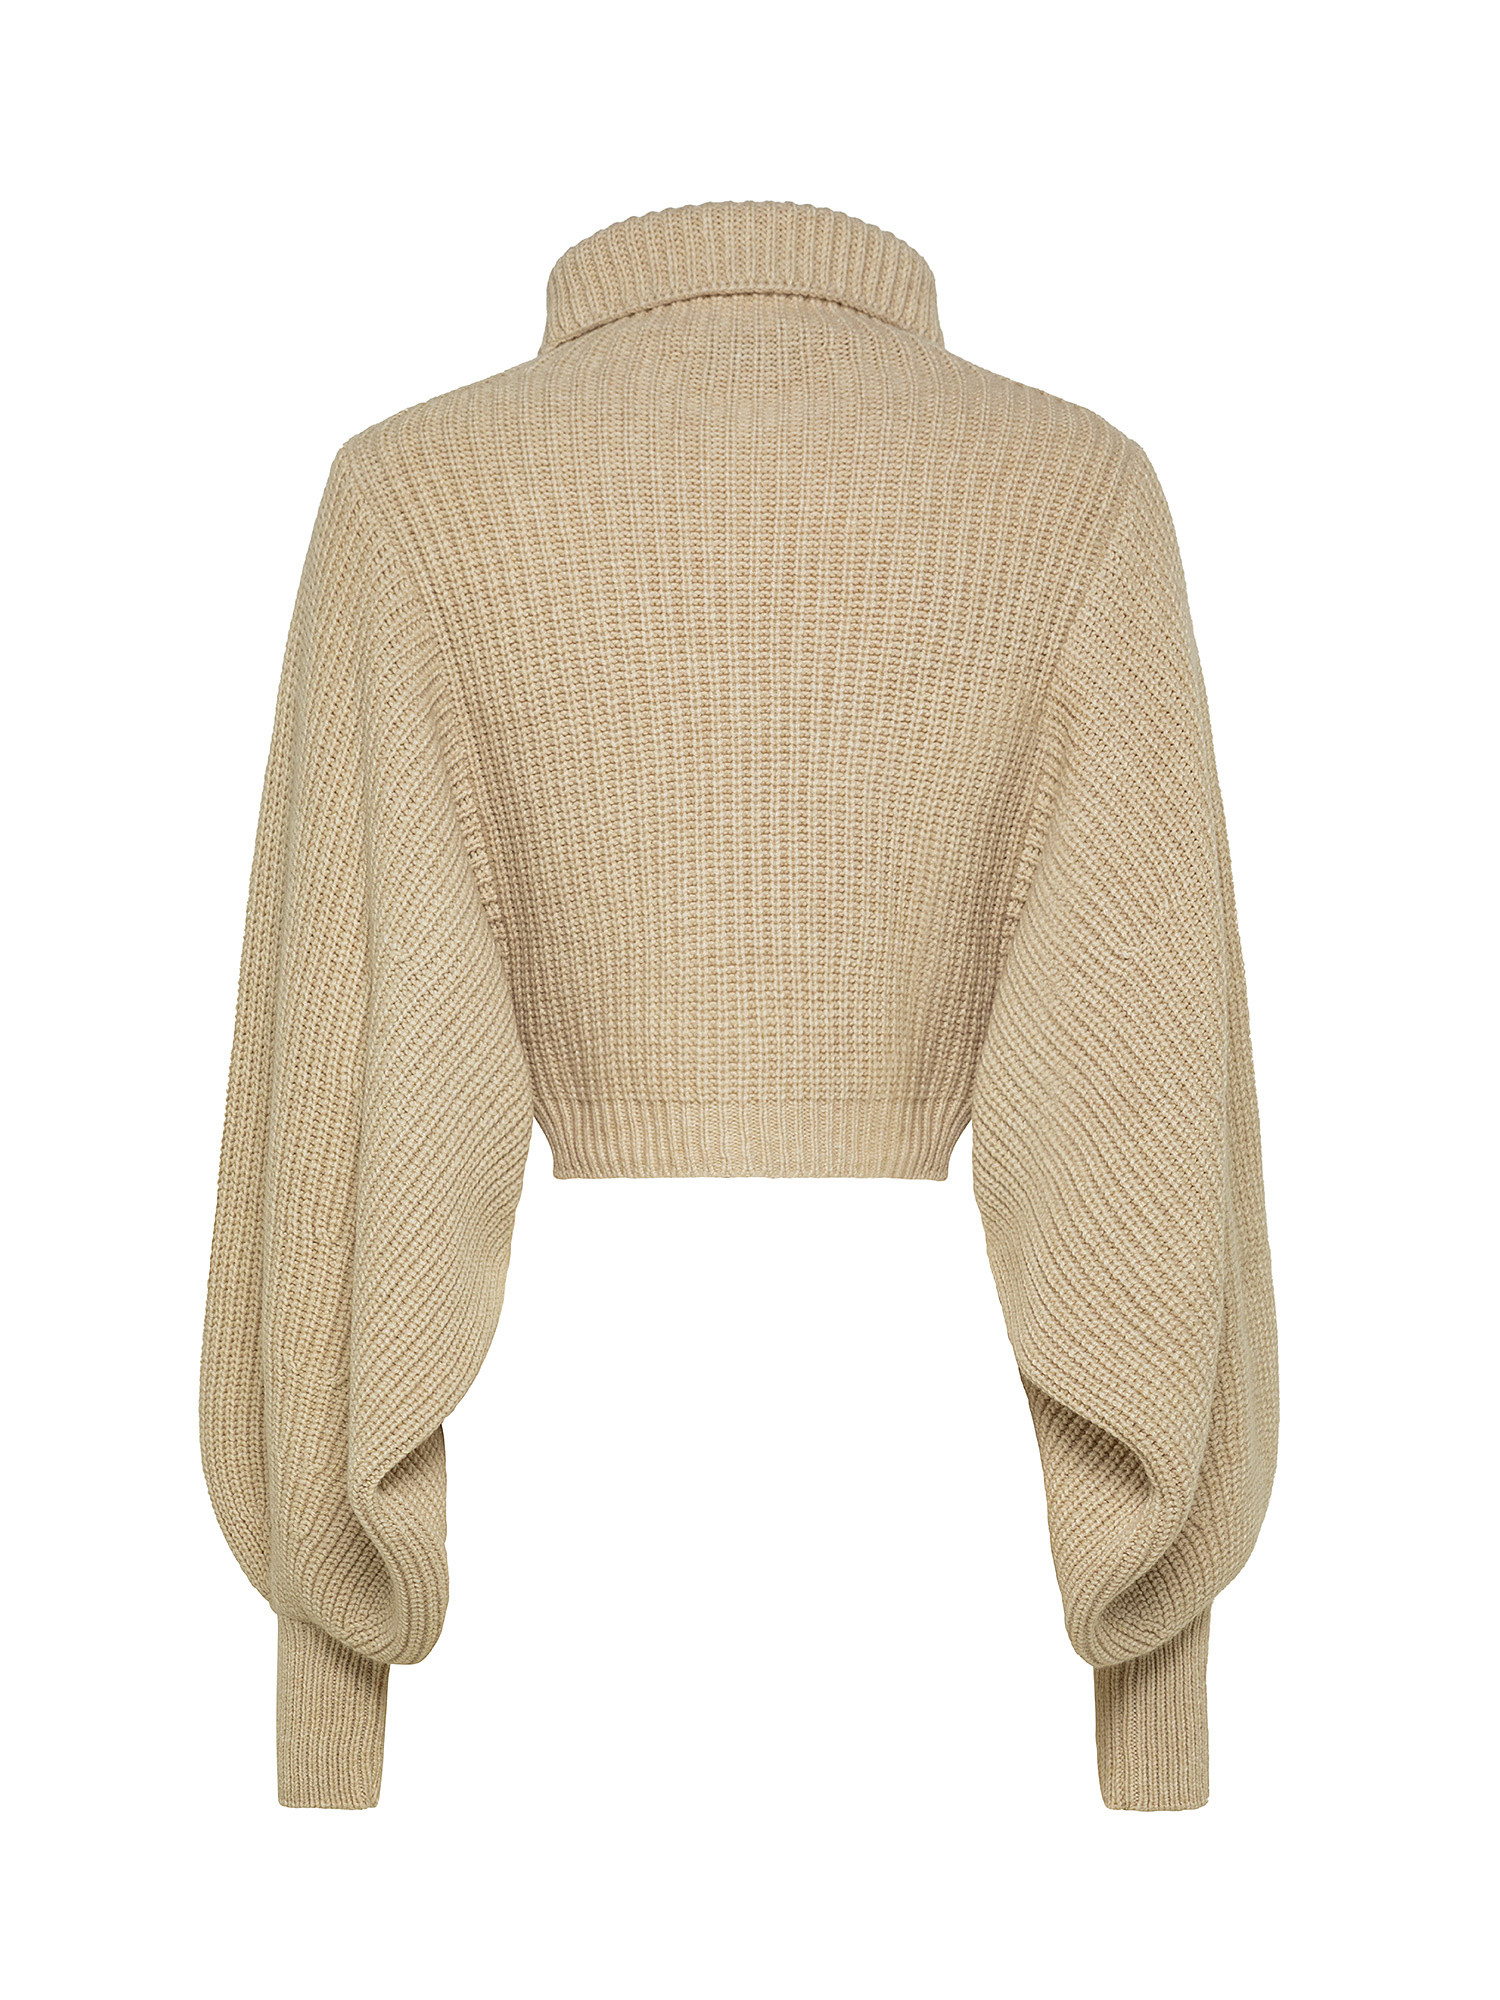 Maglia cropped oversized in misto lana a coste, Beige, large image number 1